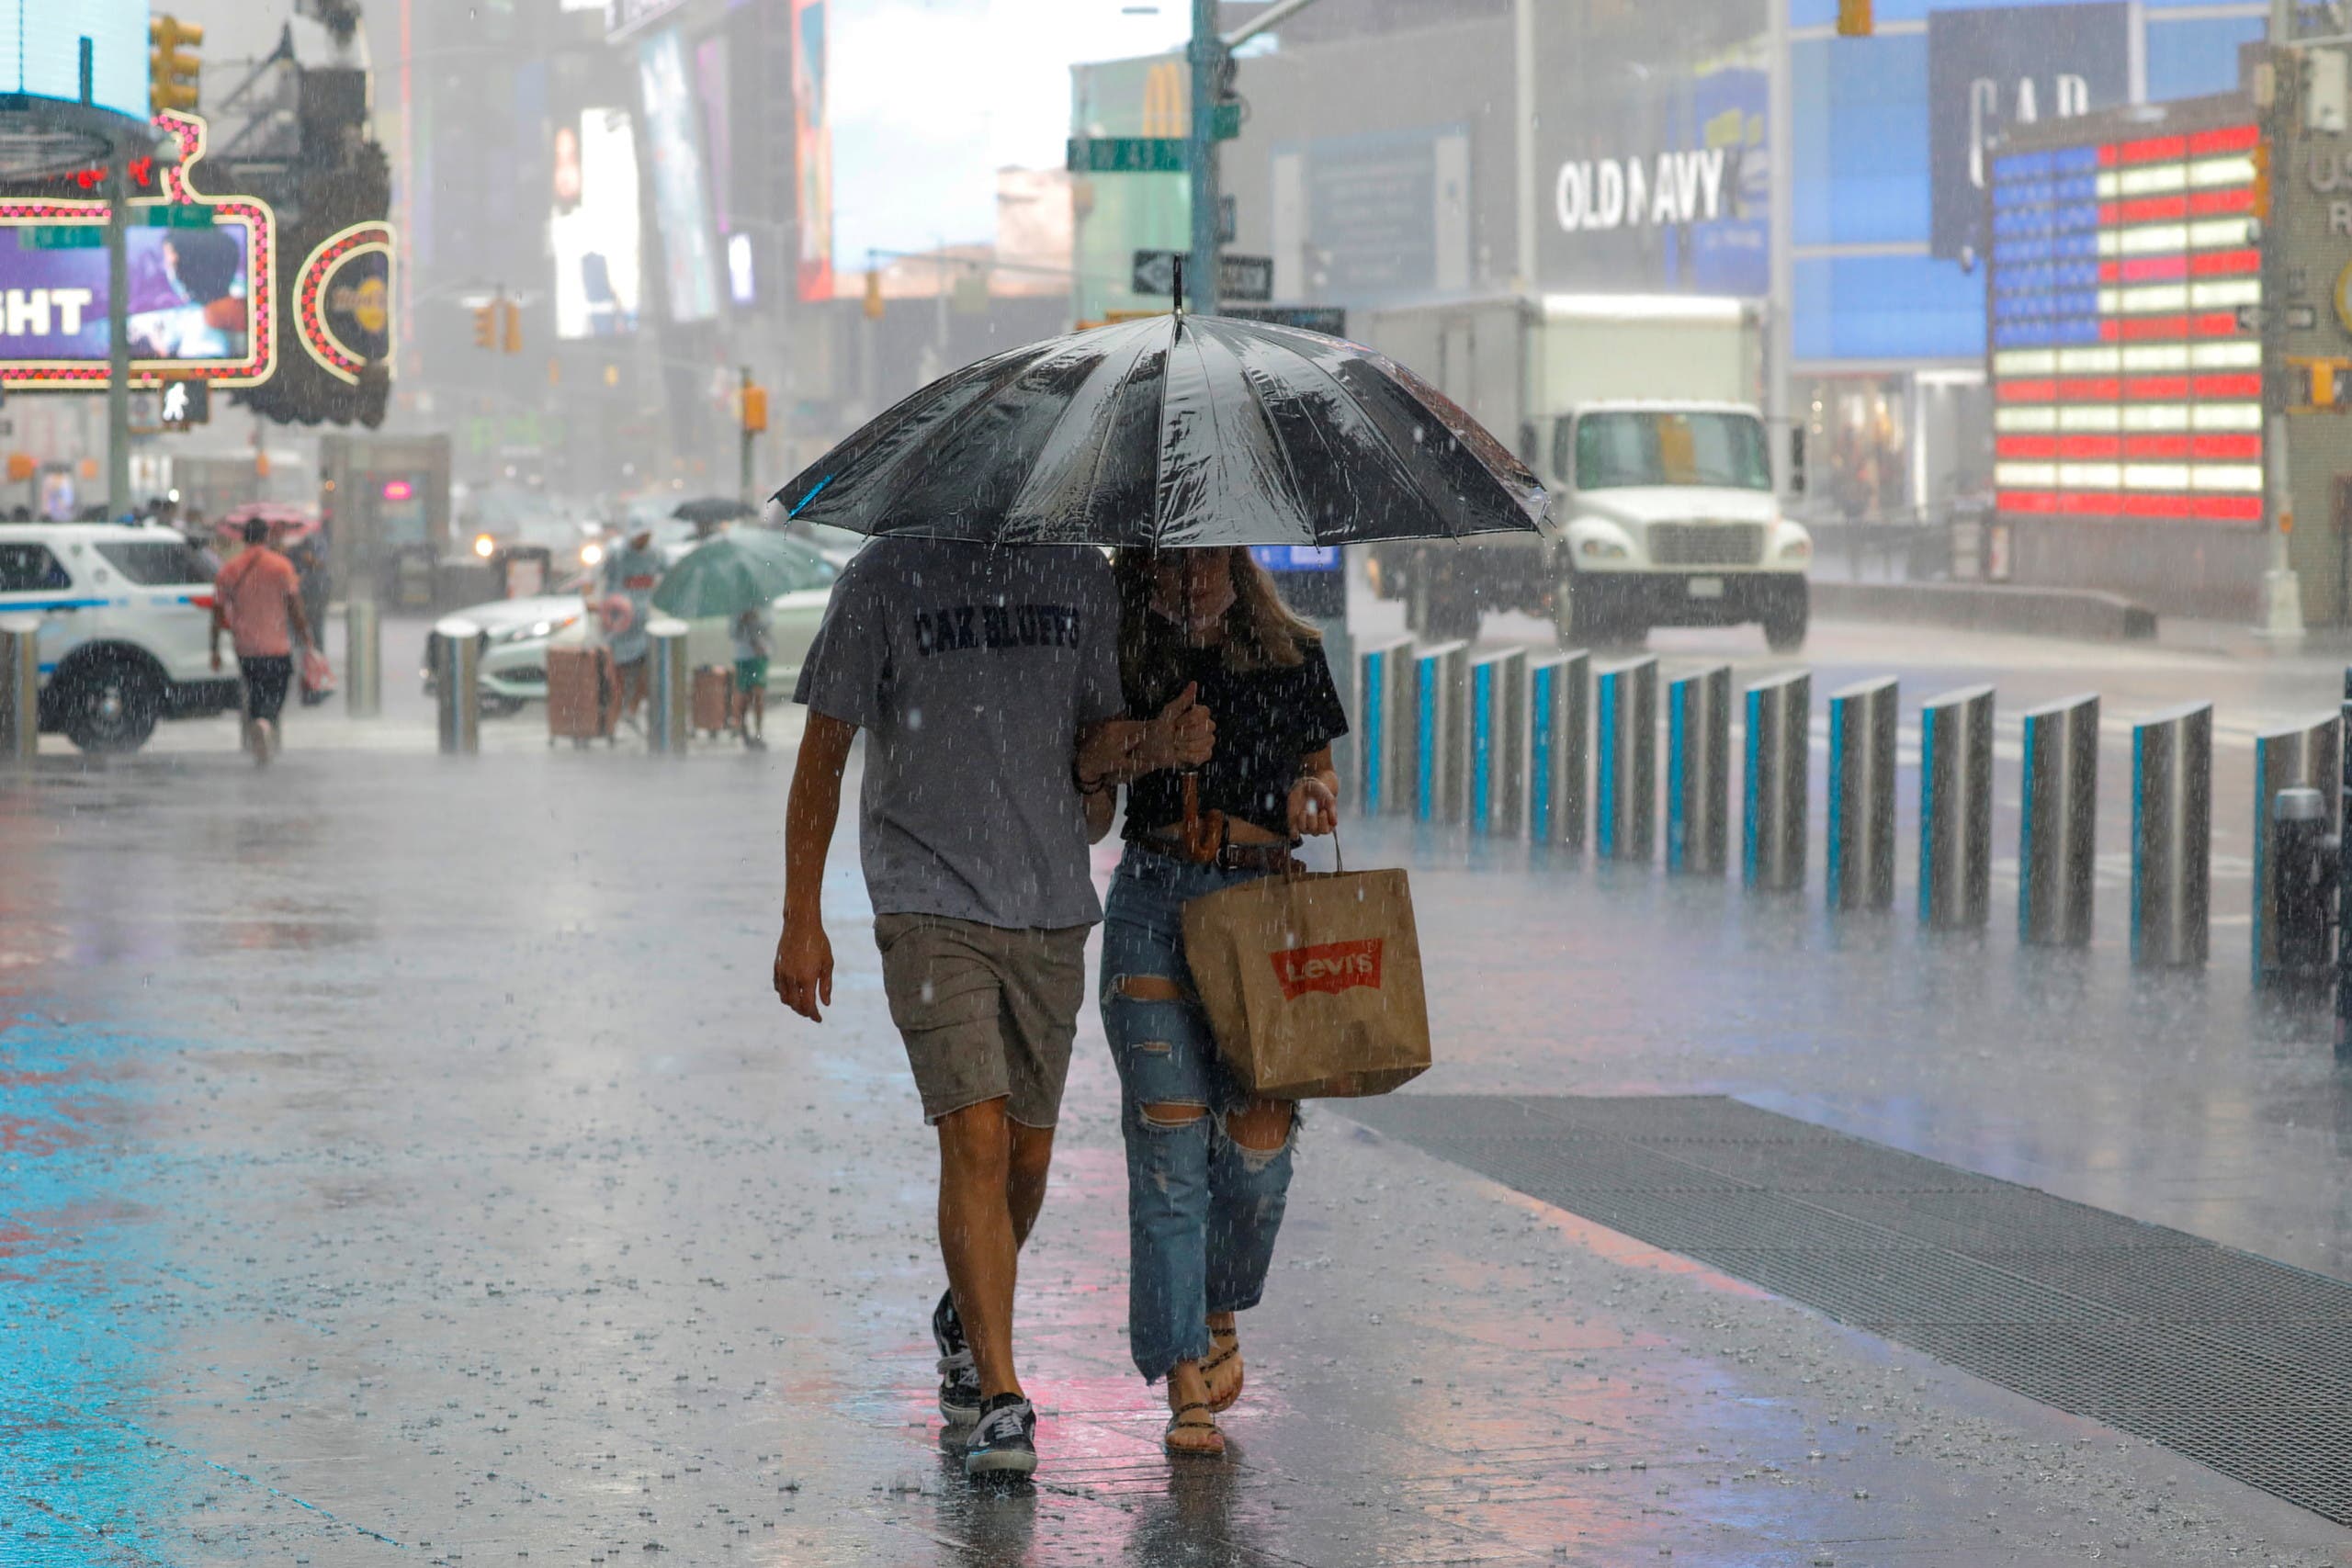 People walk through falling rain in Times Square as Tropical Storm Henri affects the region in Manhattan, New York City, US, August 23, 2021. (Reuters)